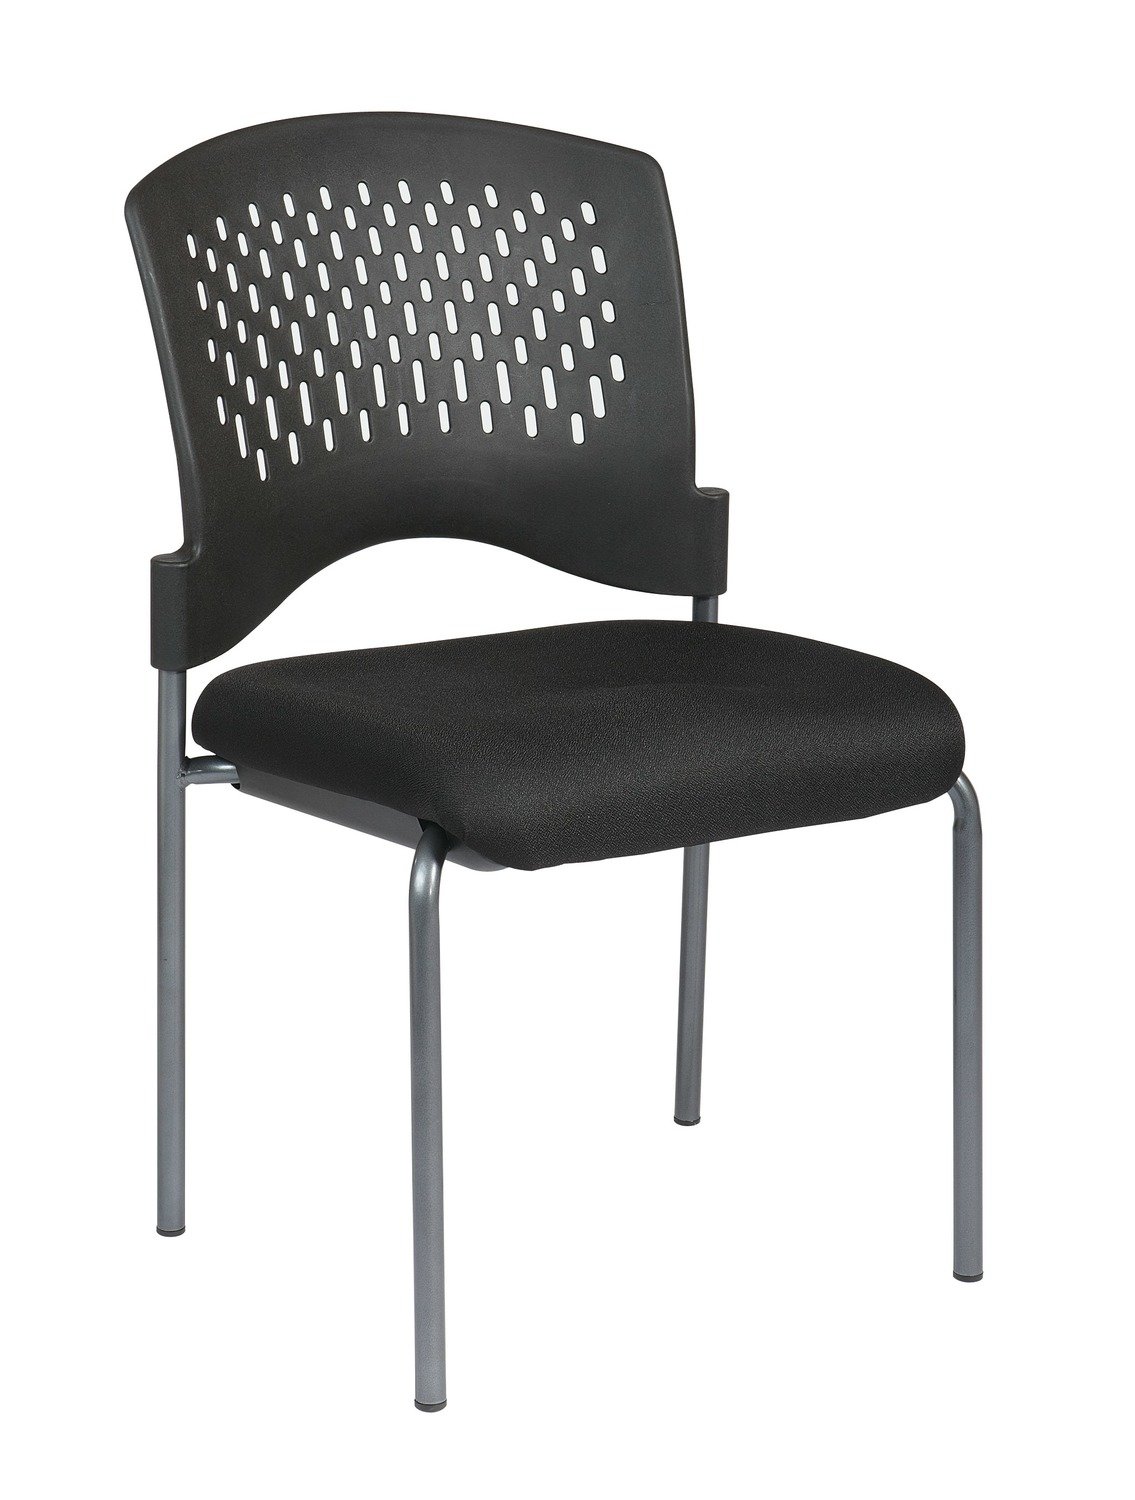 TITANIUM FINISH ARMLESS VISITORS CHAIR WITH VENTILATED PLASTIC WRAP AROUND BACK